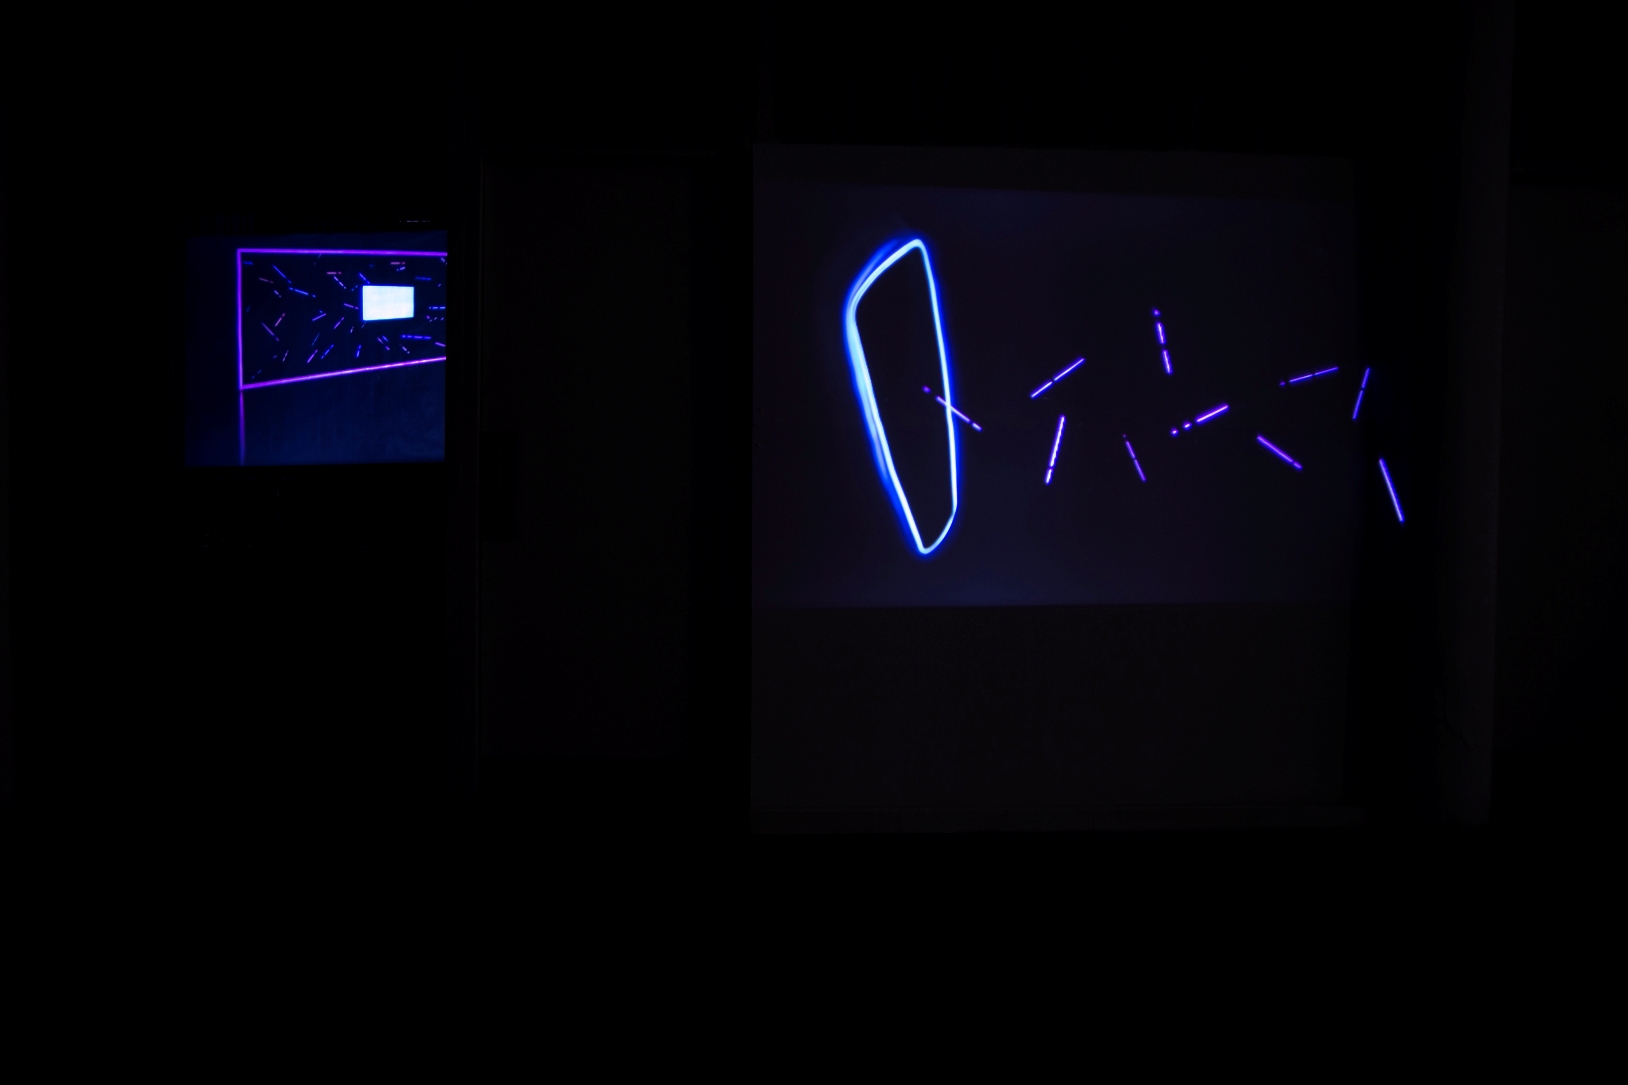 Neon Art by the Talented Serbian Artist Vukasin Delevic